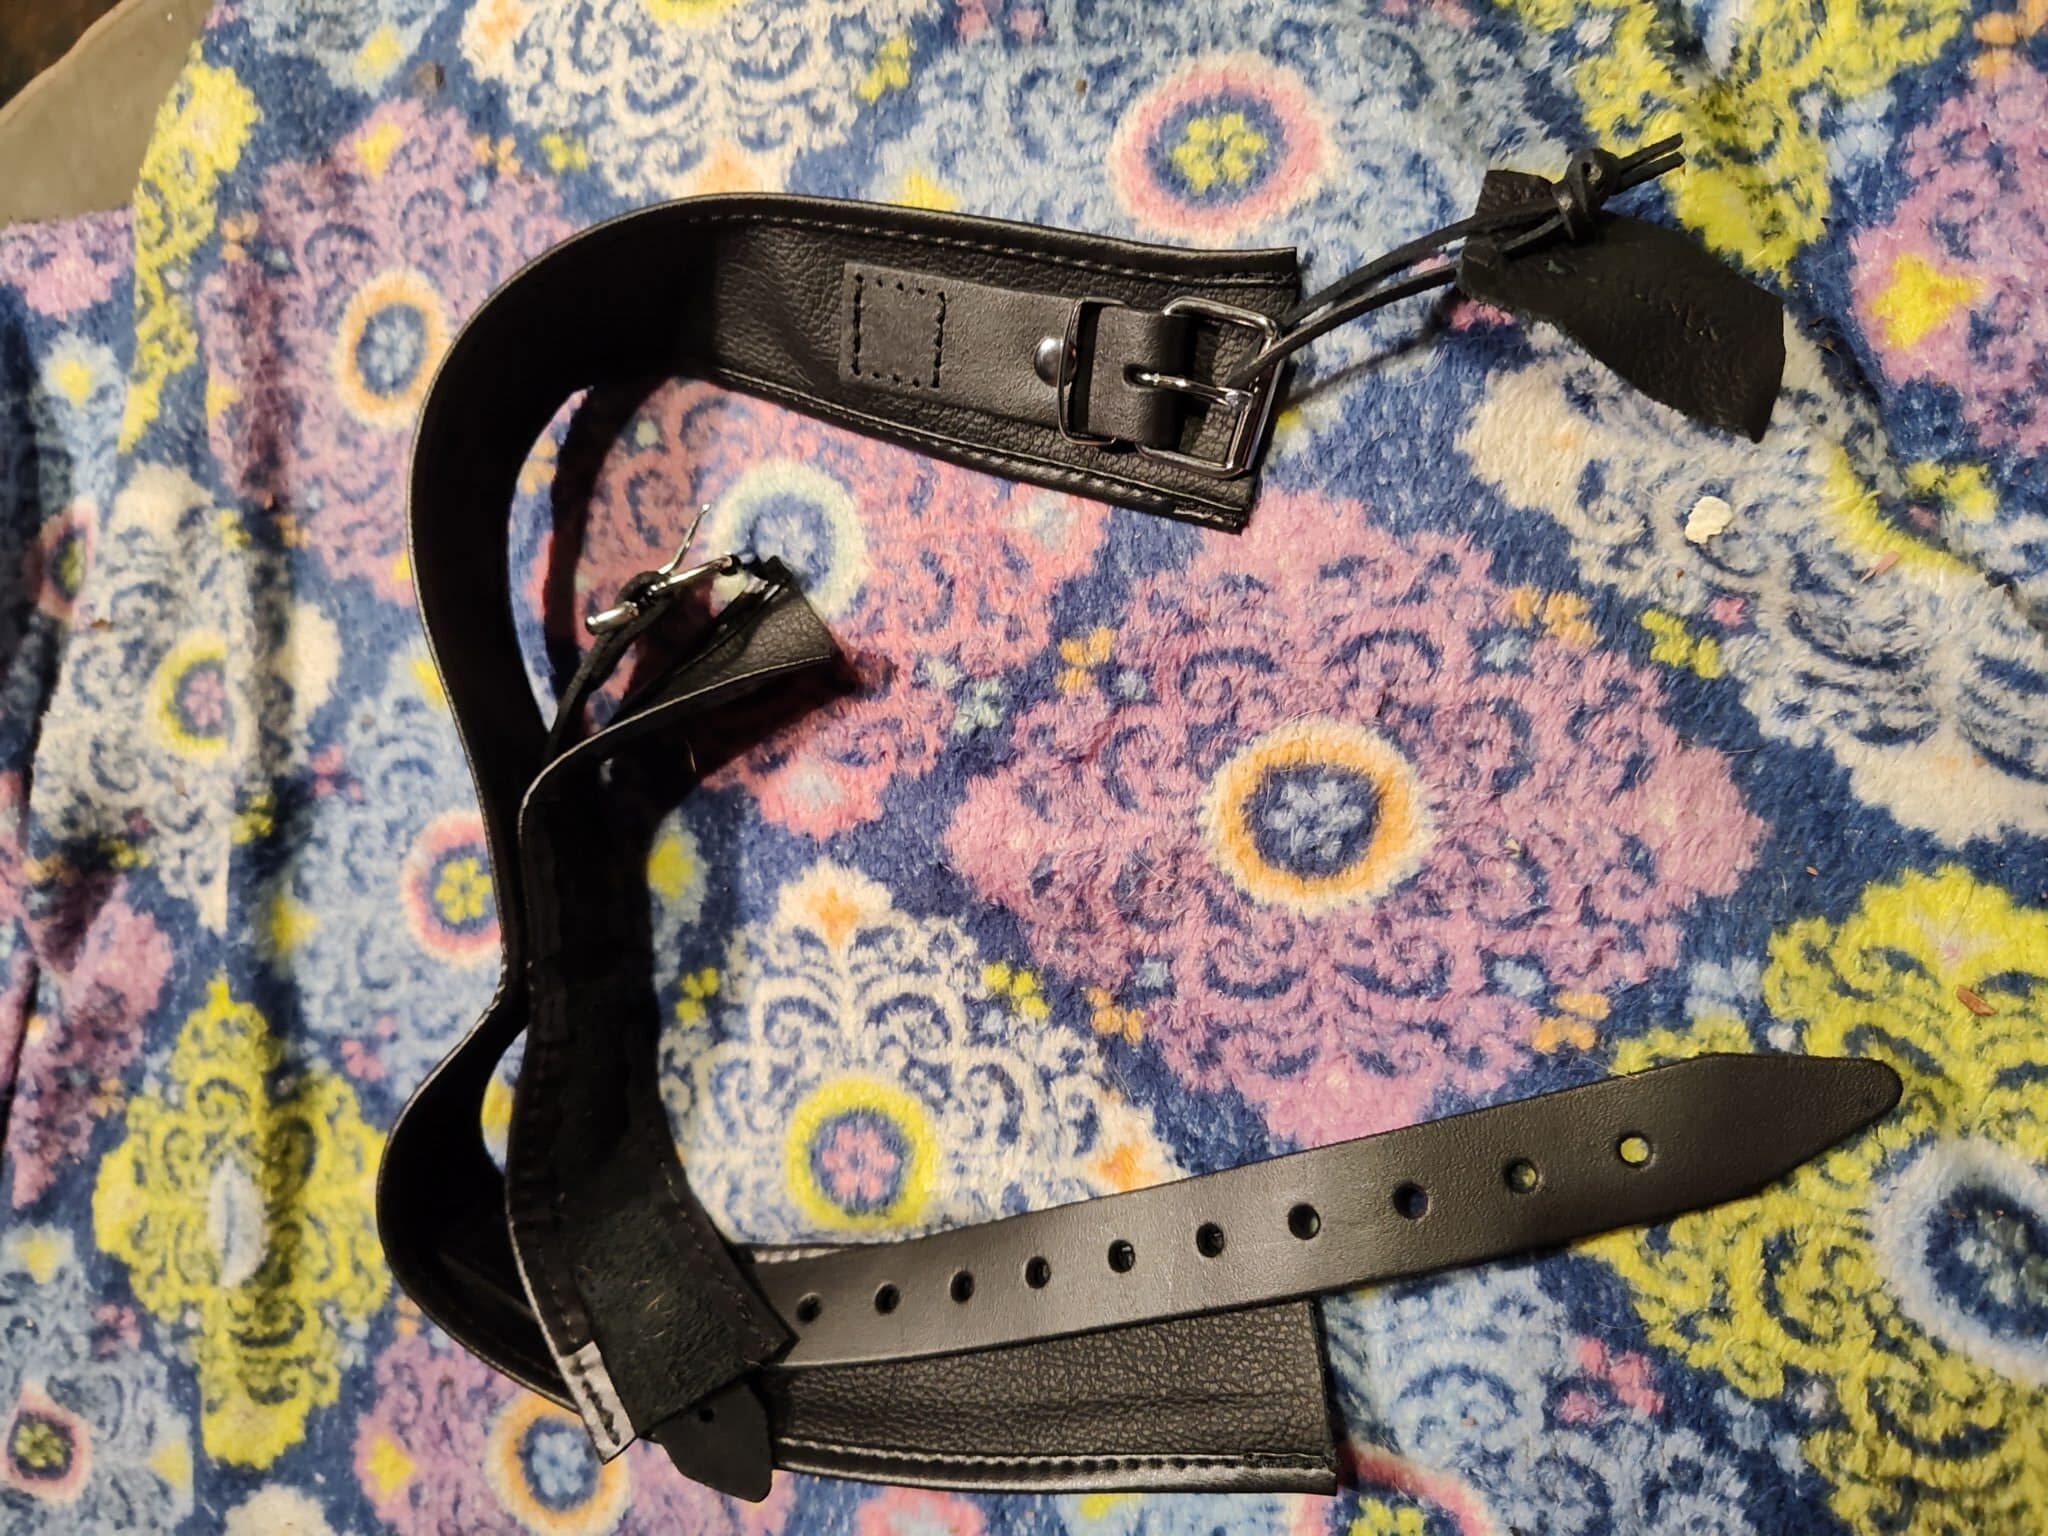 DOMINIX Deluxe Leather Wrist to Thigh Restraints. Slide 8